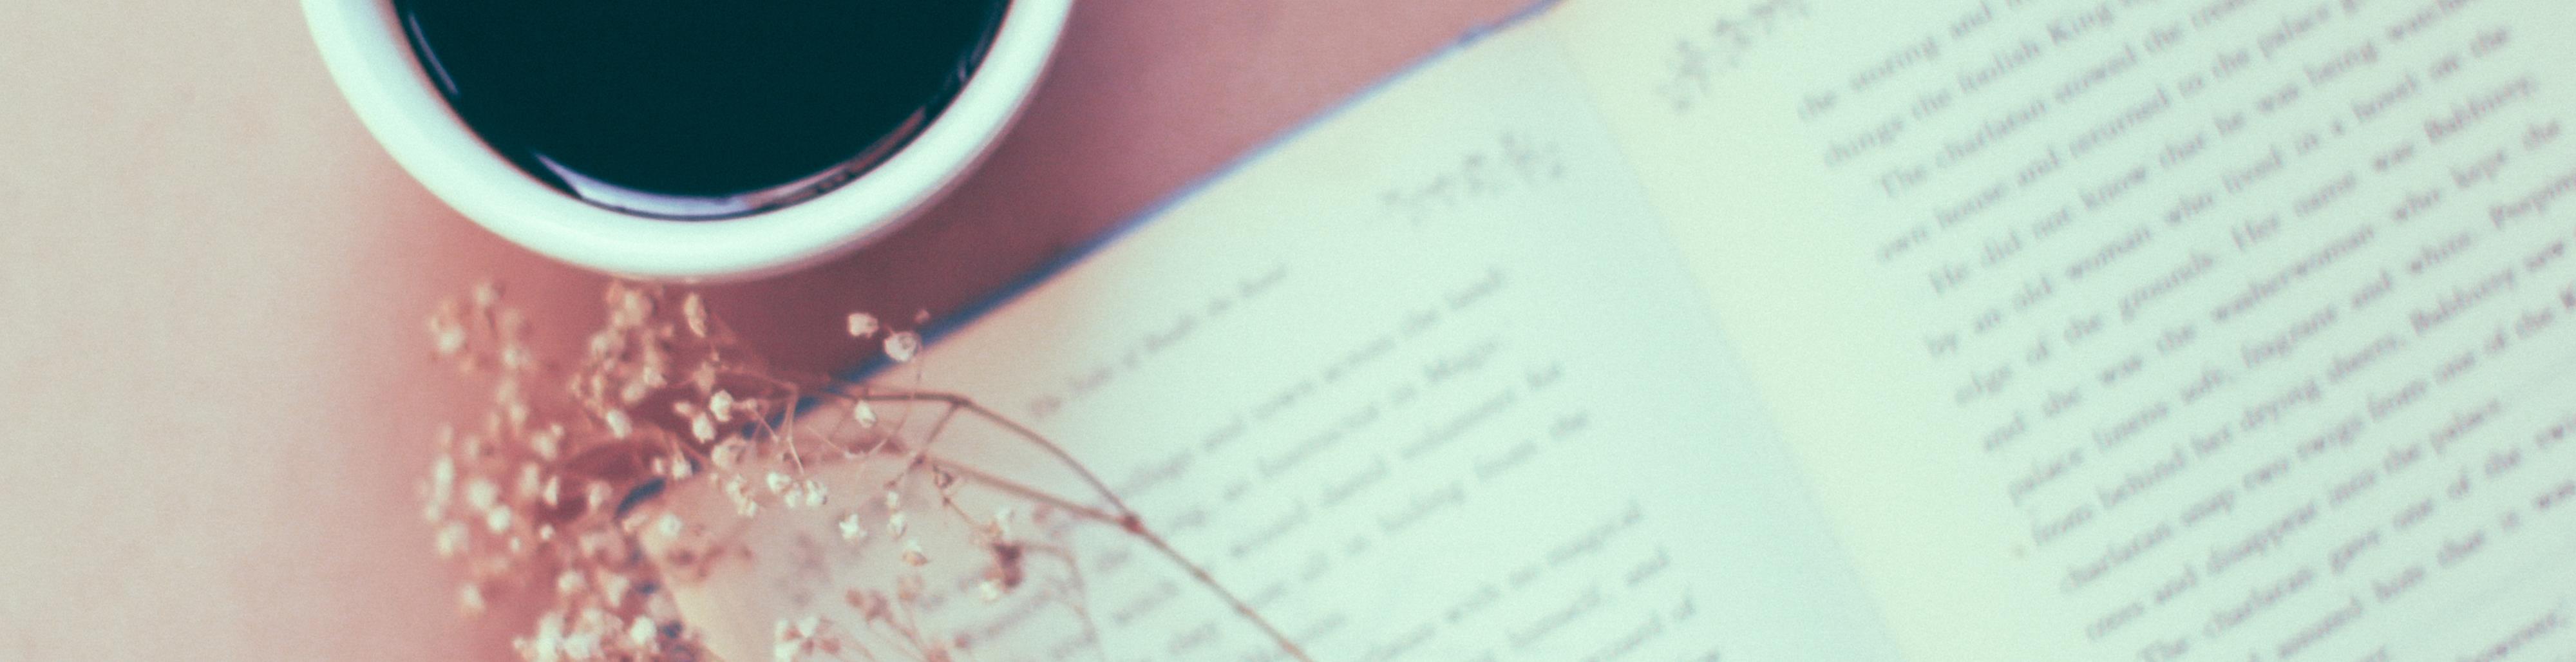 Book, flowers and coffee